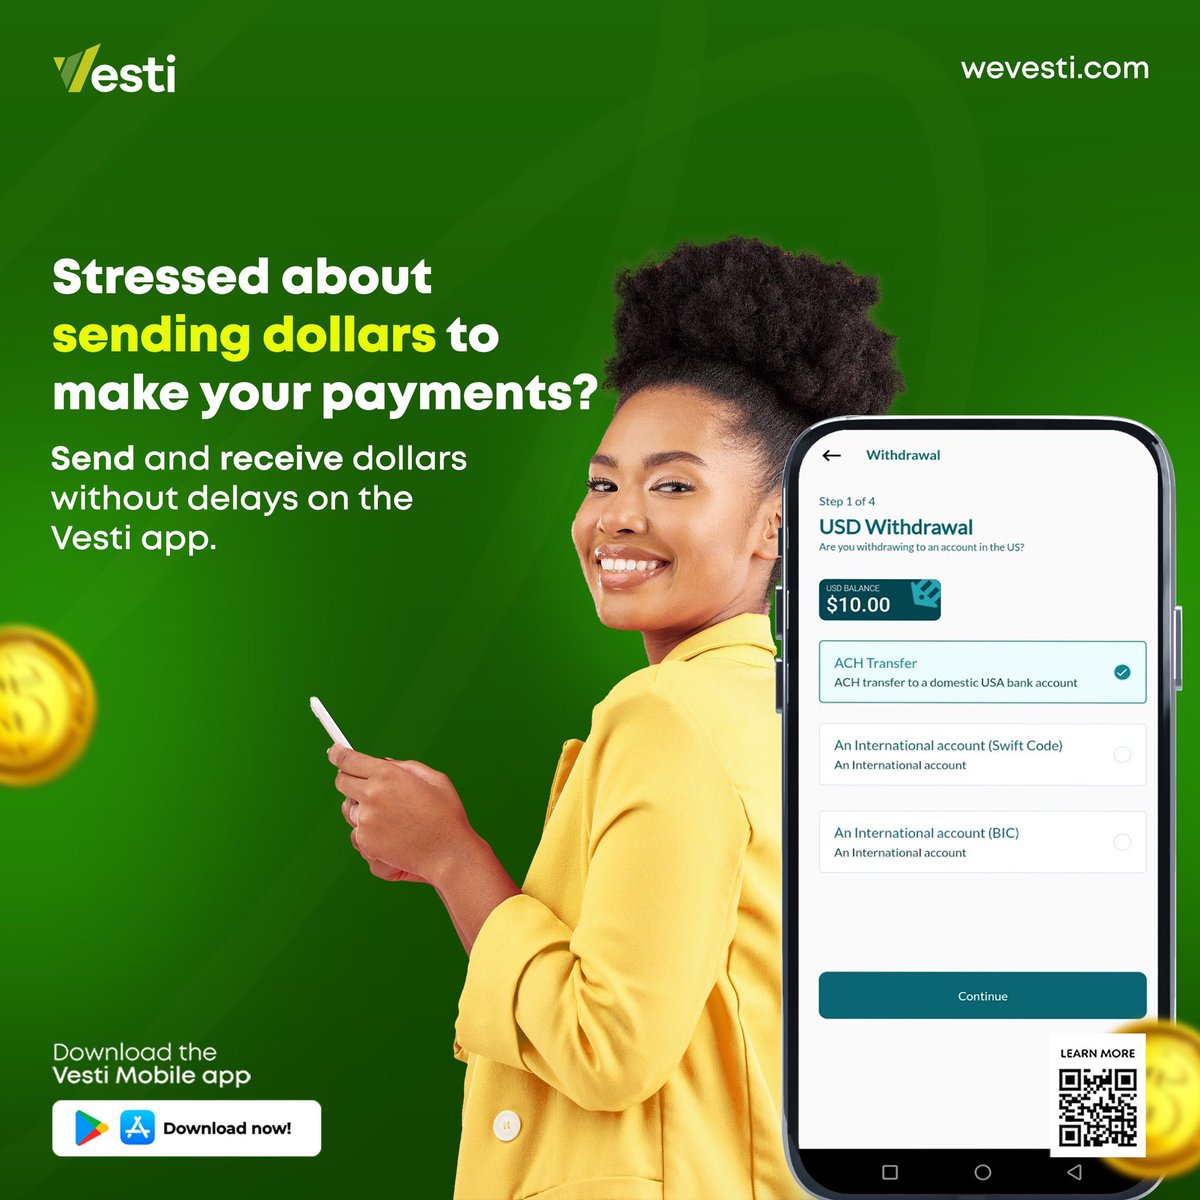 With Vesti, you can send and receive dollars fast and securely, making payments a breeze. Don't let money transfers hold you back. Download Vesti today! #SendMoneyFast #NoMoreDelays #GlobalPayments #FinancialFreedom #Vesti #Fintech